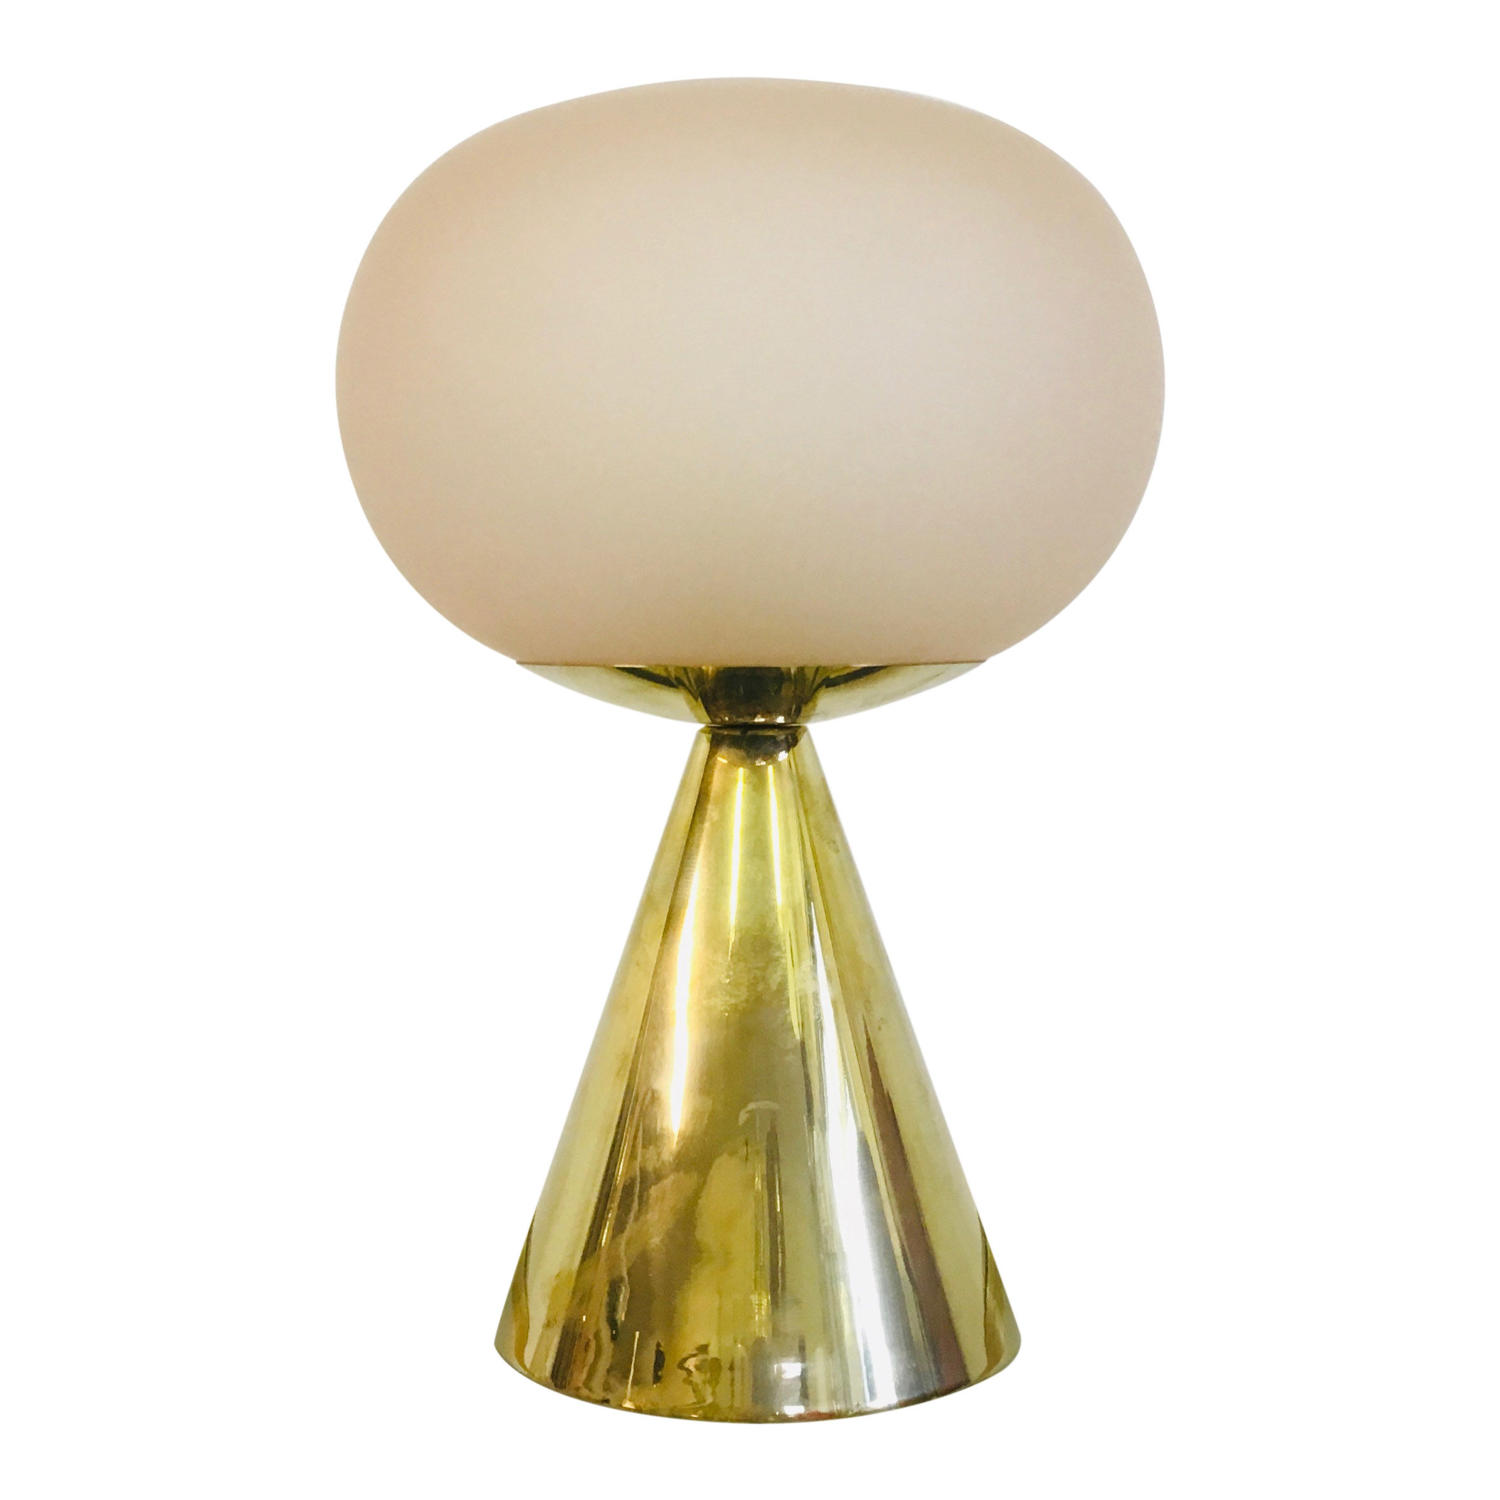 Italian pink glass and brass table lamp